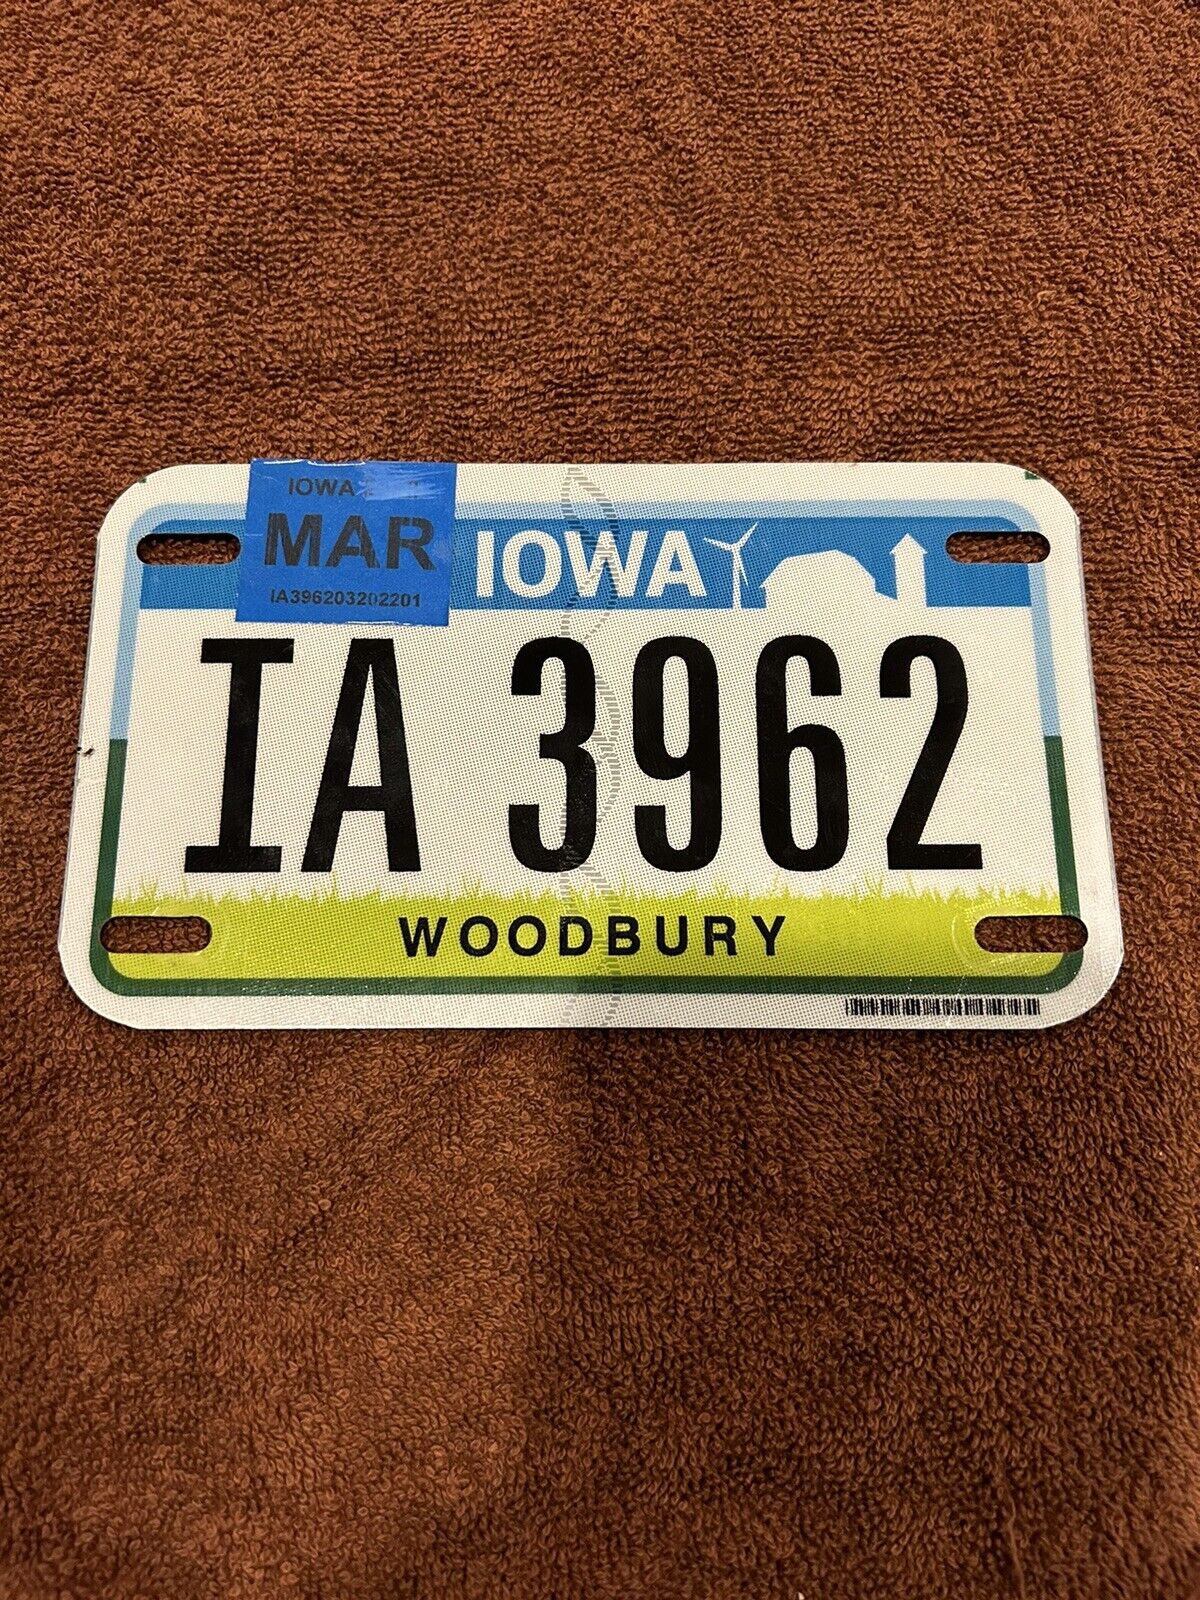 Iowa Motorcycle License Plate Used